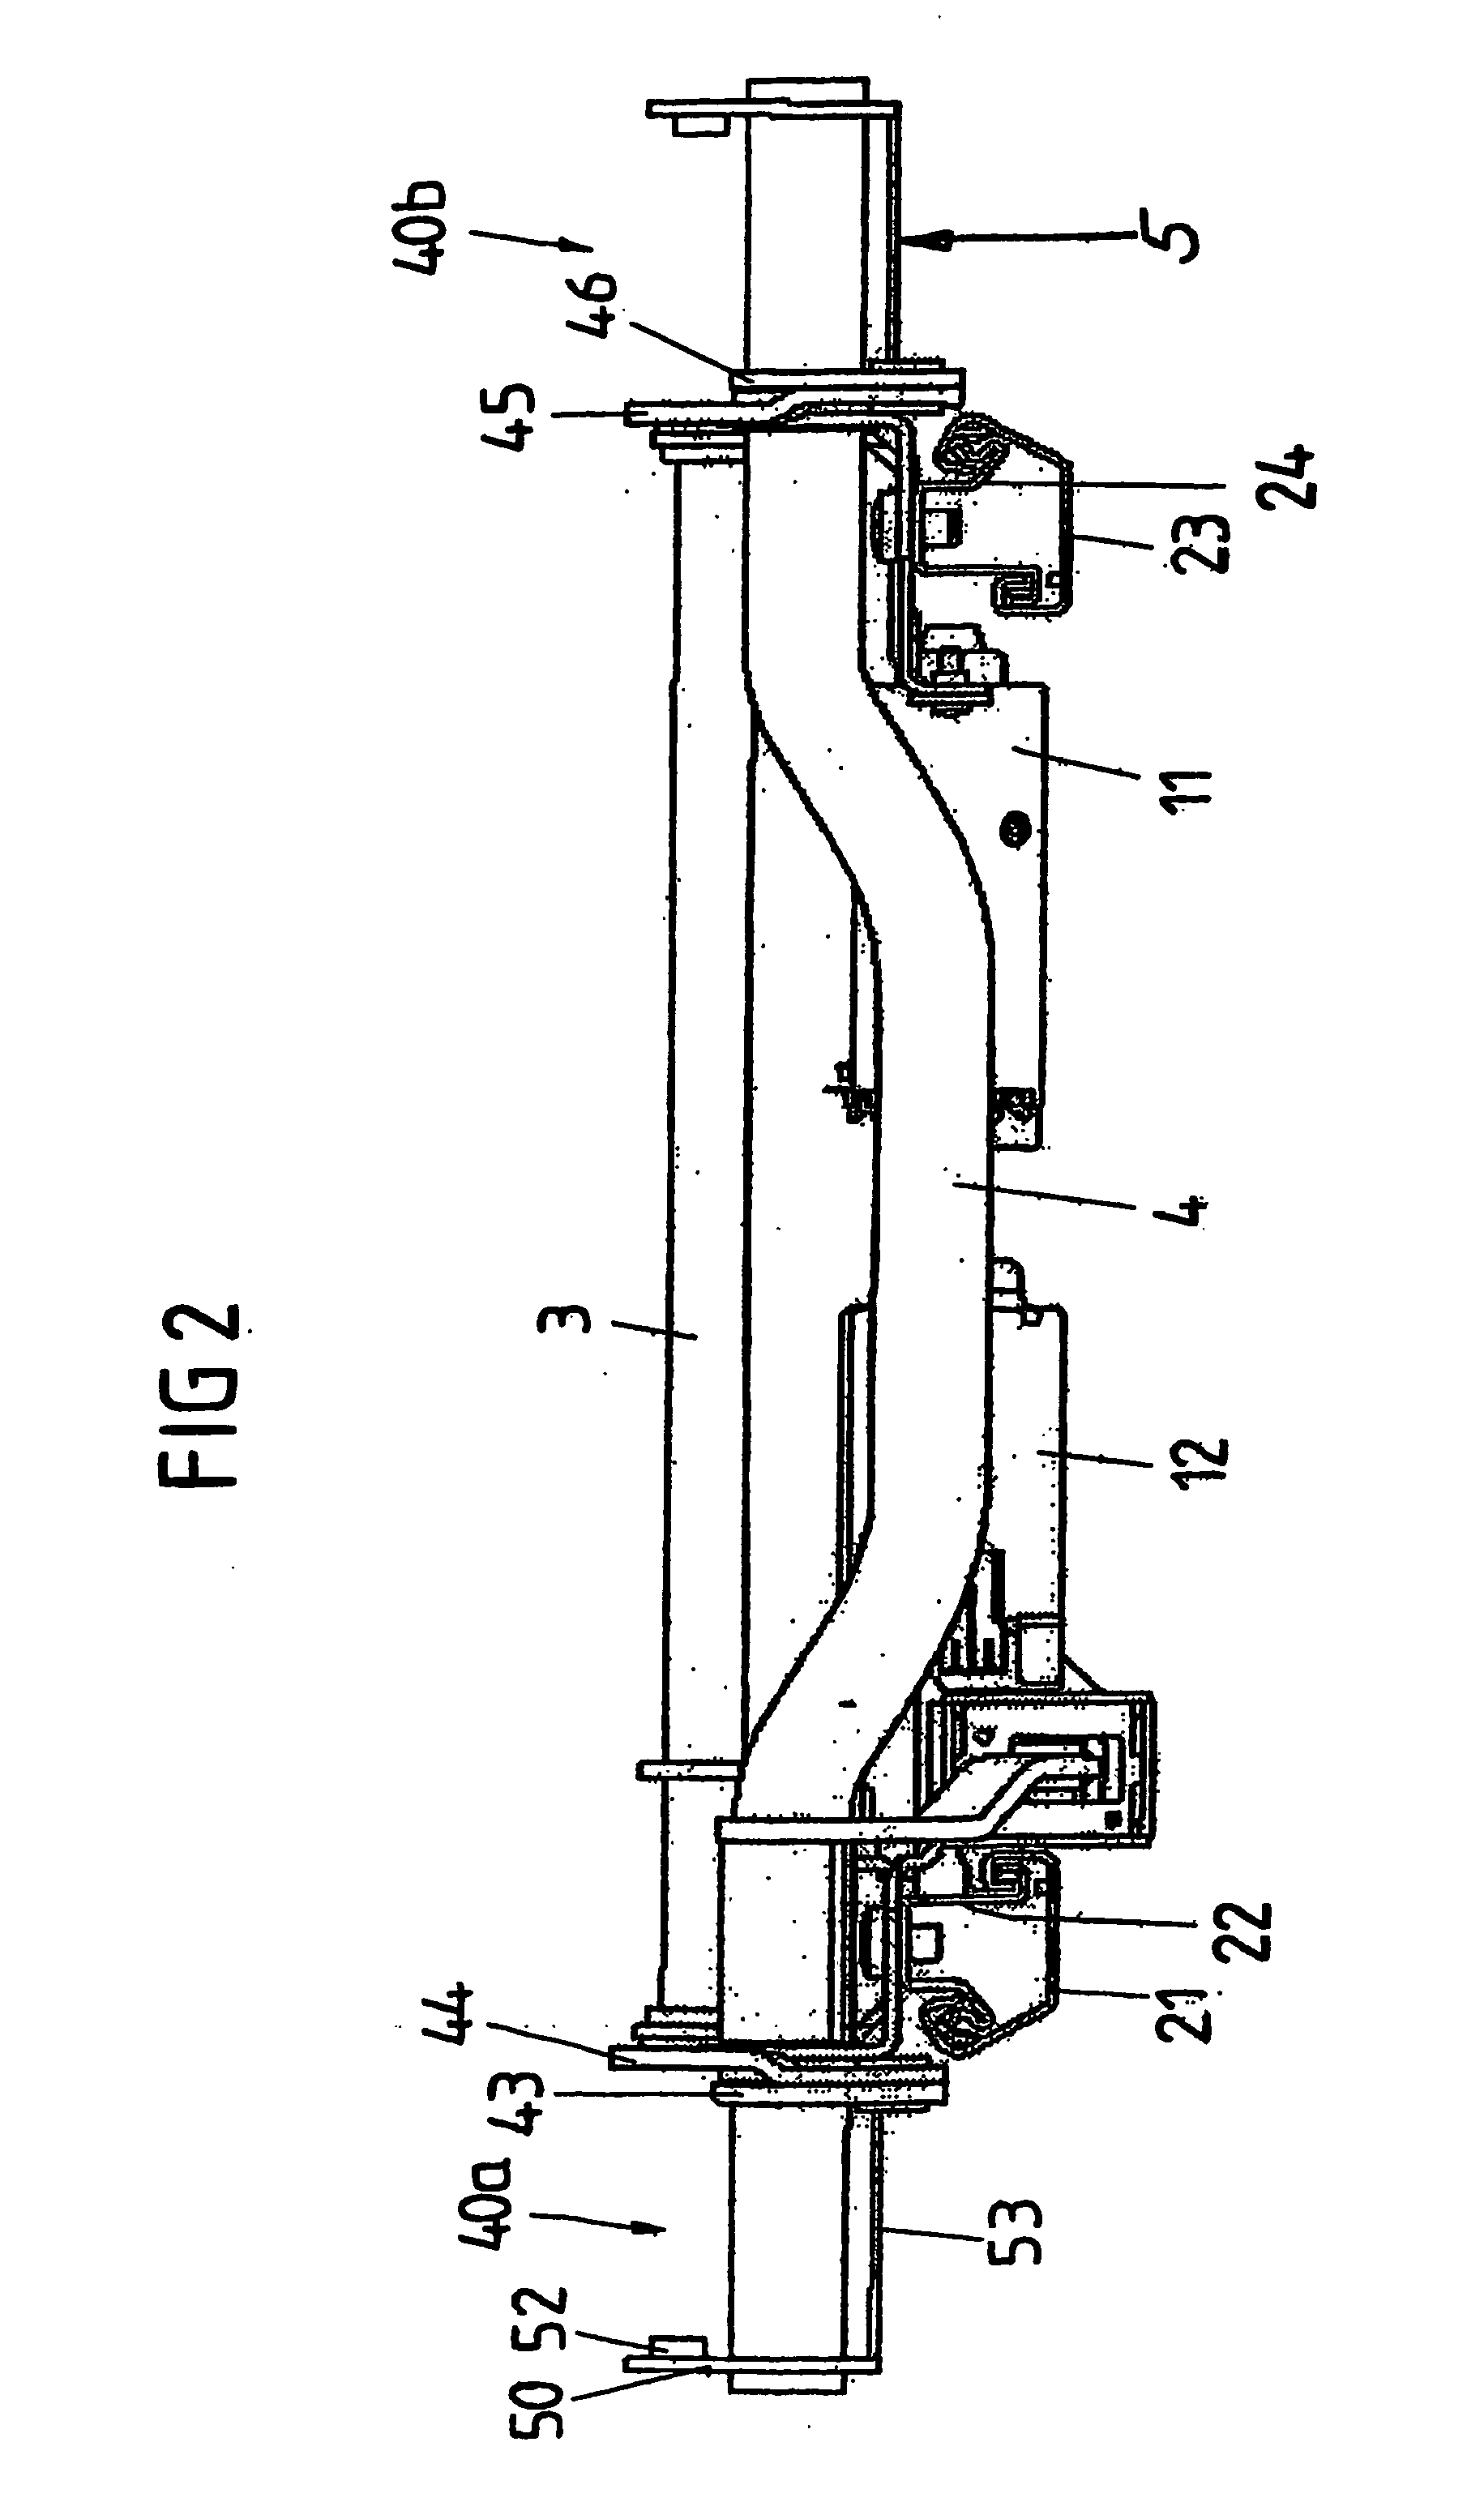 Device for fixing a belt lock of a safety belt on a vehicle seat